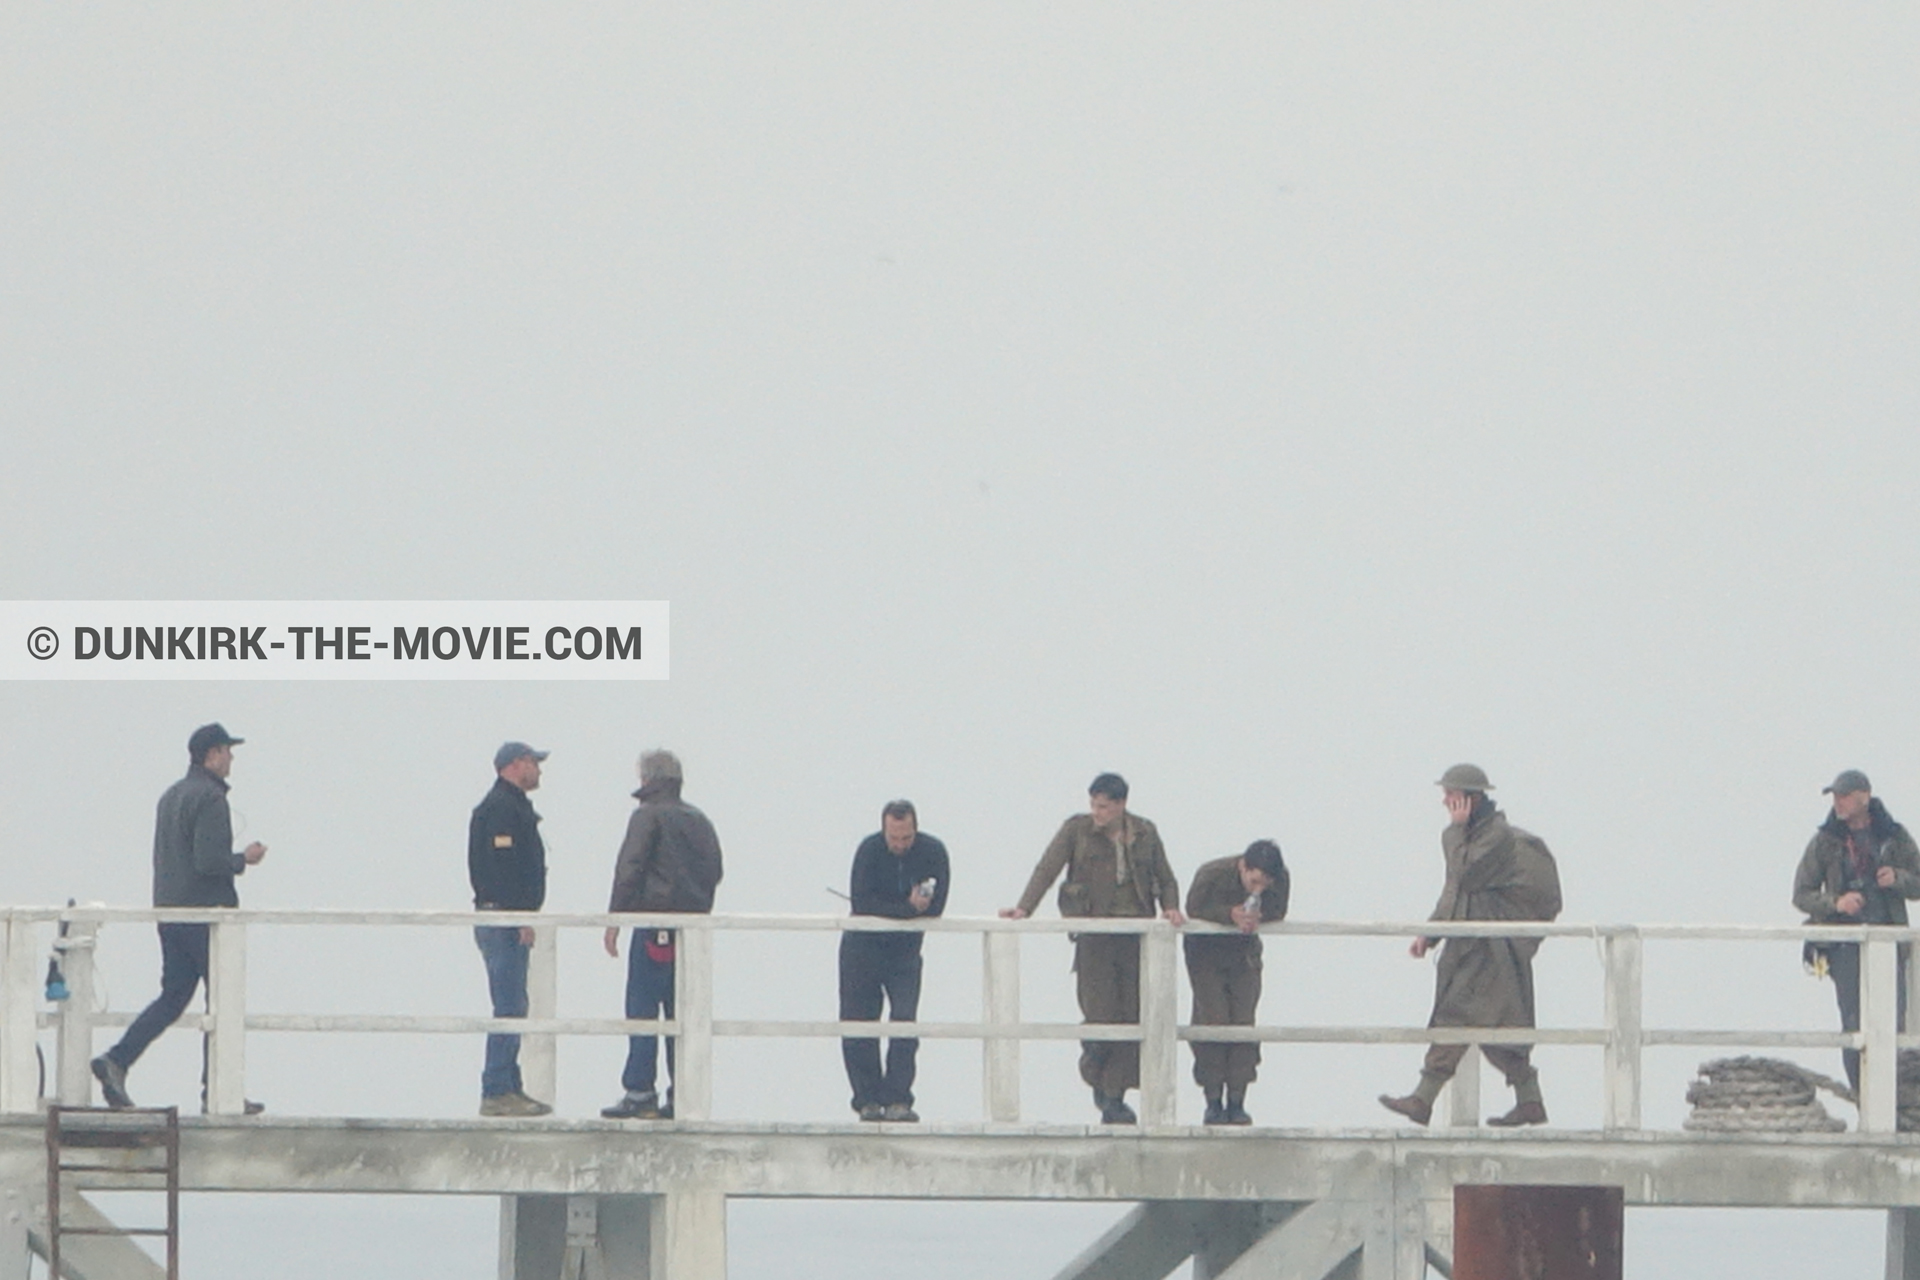 Picture with actor, grey sky, EST pier, technical team, Nilo Otero,  from behind the scene of the Dunkirk movie by Nolan